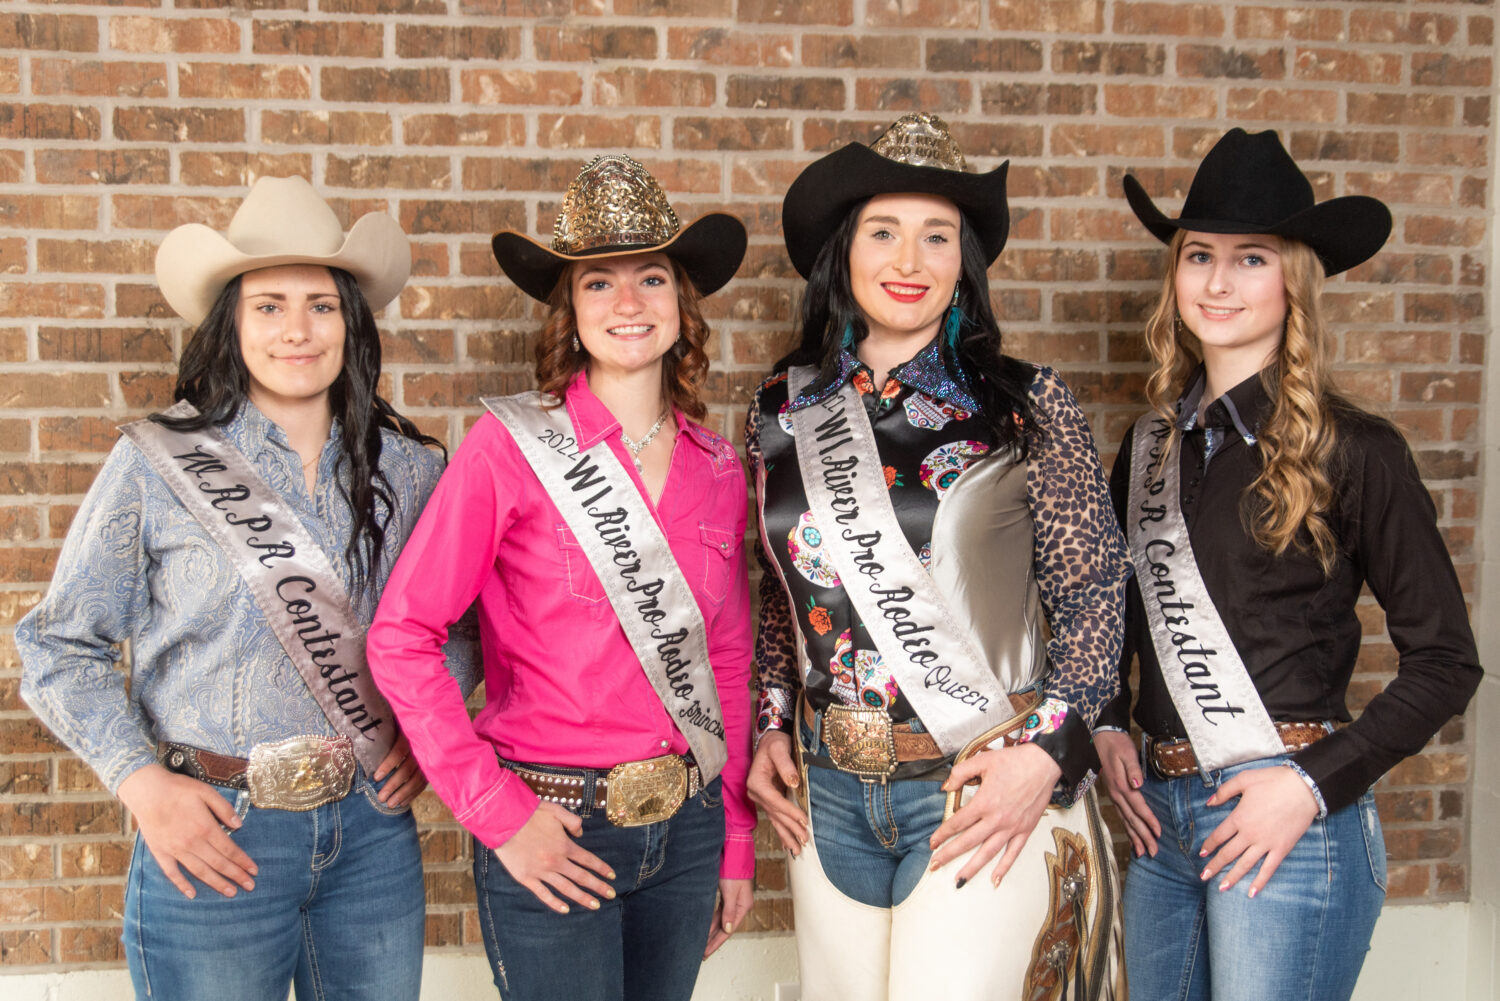 Wisconsin River Pro Rodeo contestants compete to become the 2023 Queen